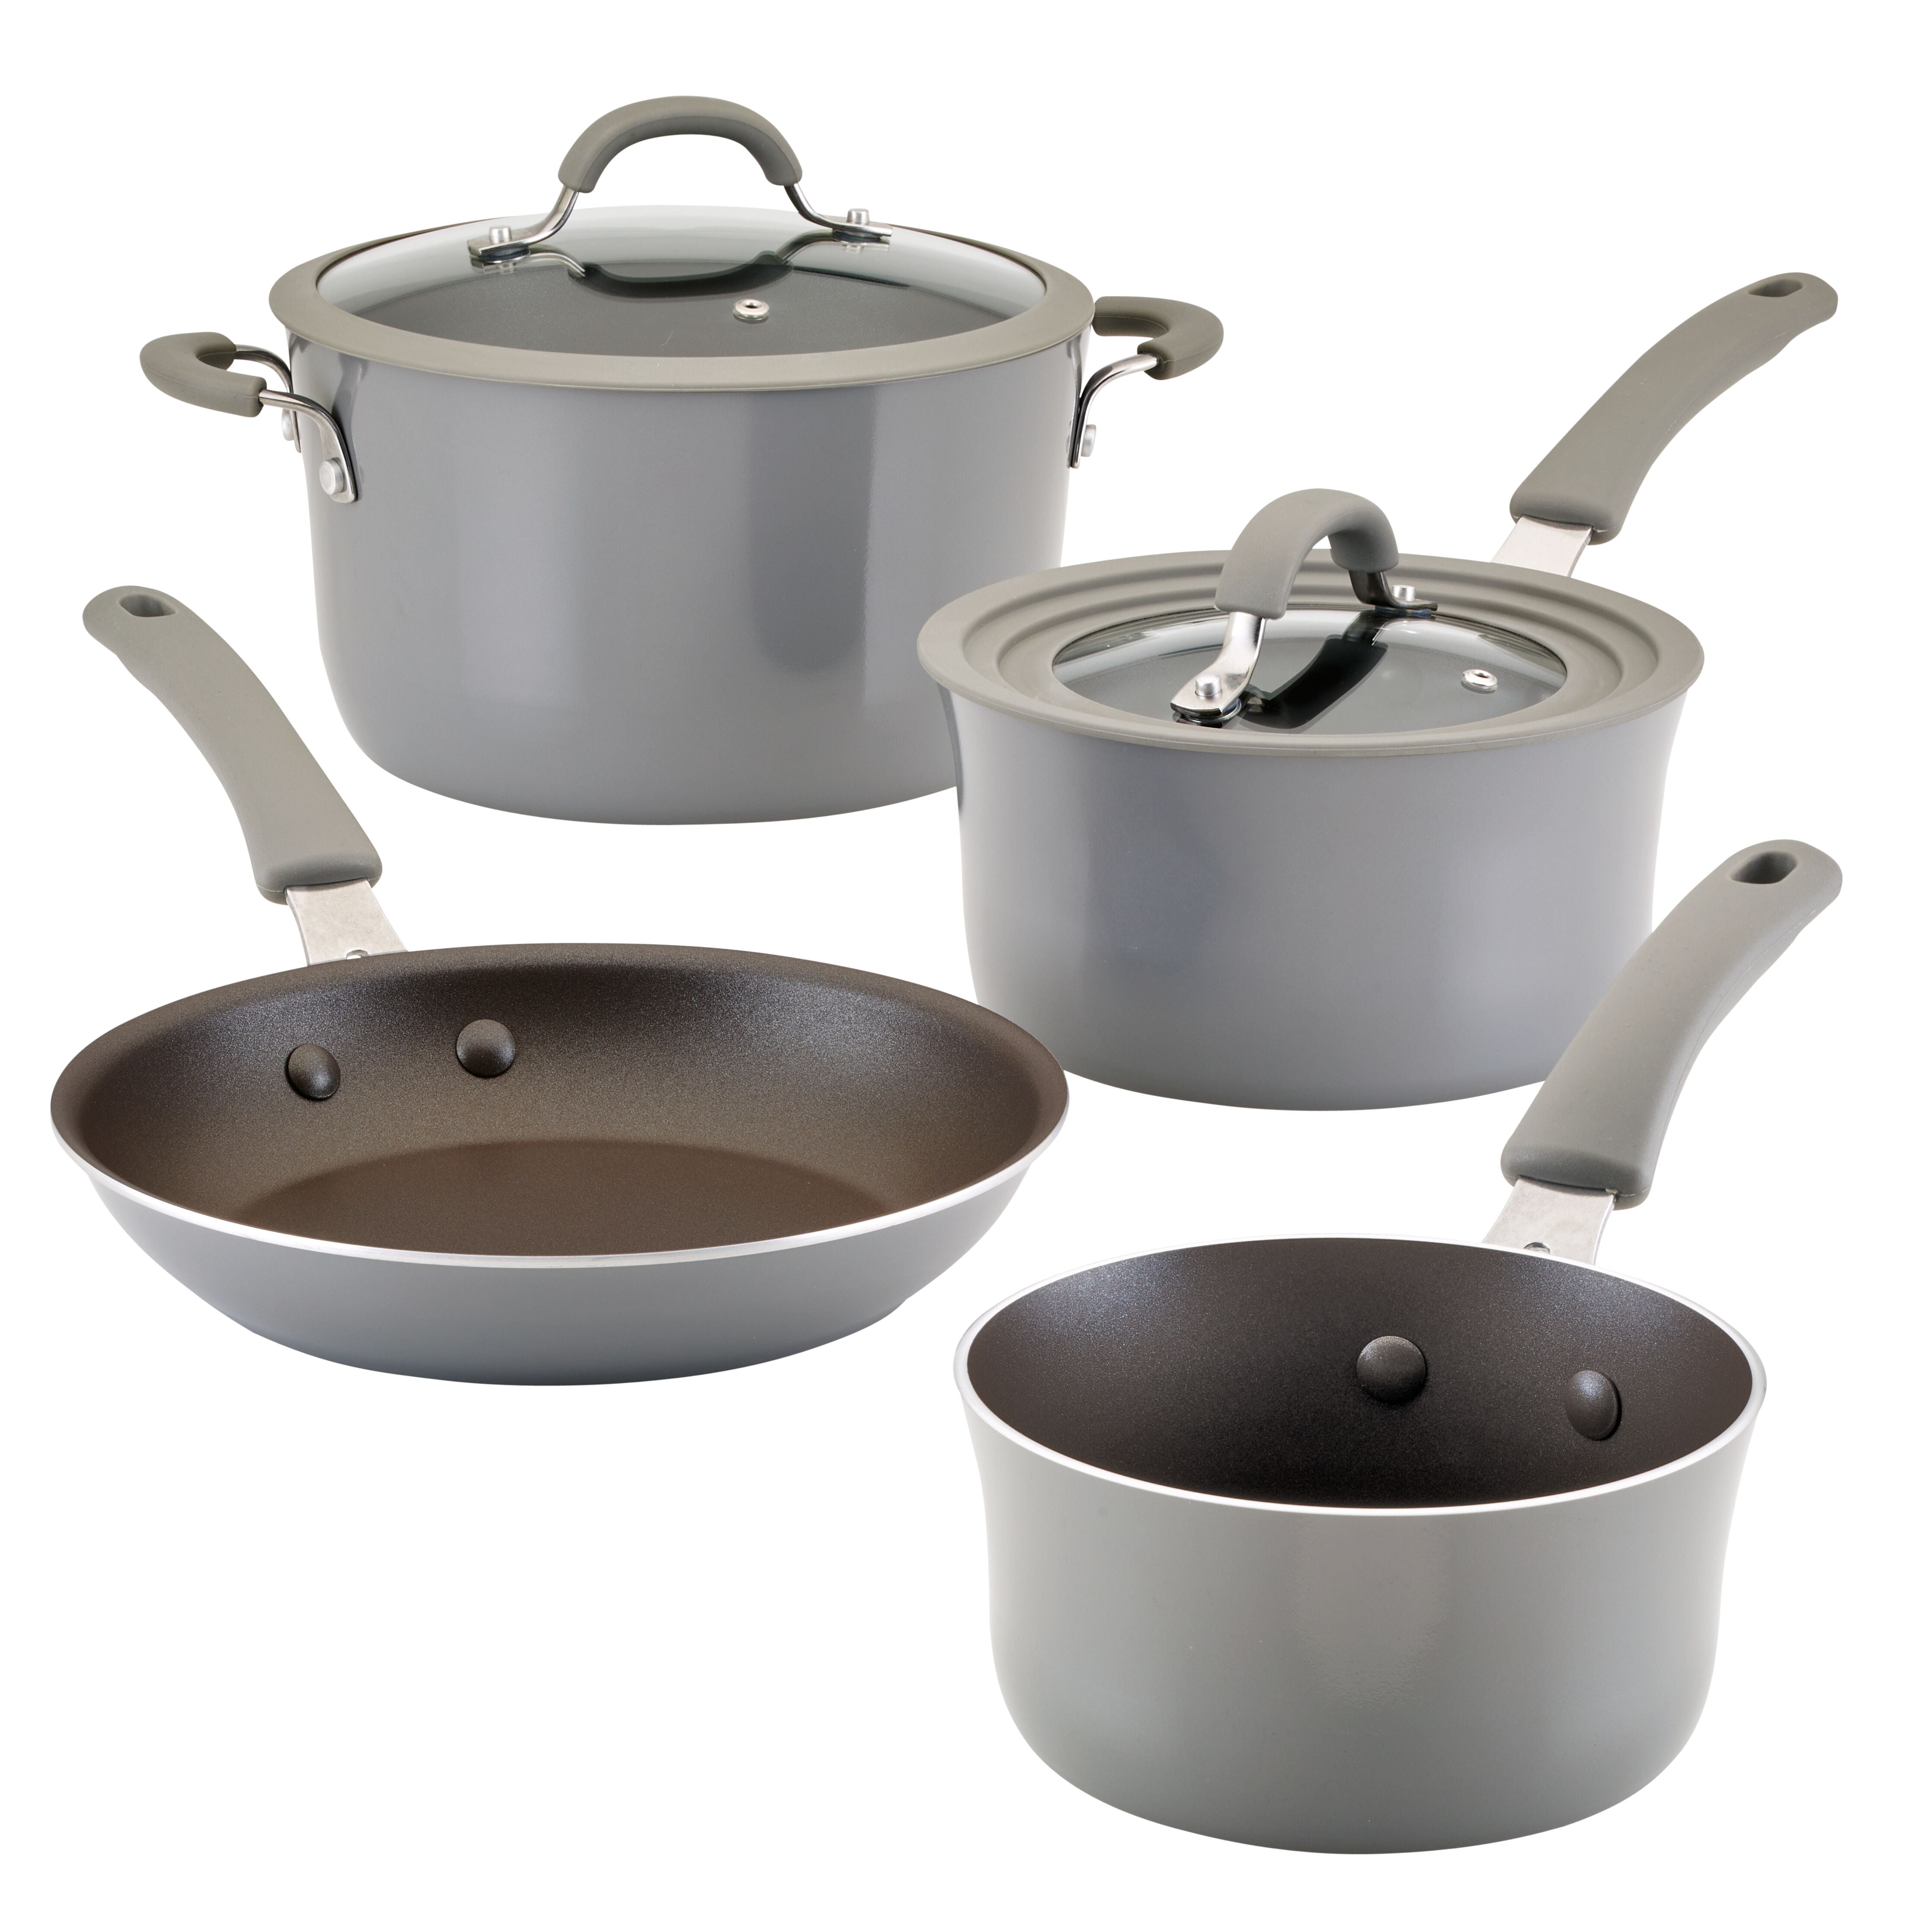 T-Fal Ultimate Hard Anodized Cookware Set - Black, 1 - Fry's Food Stores